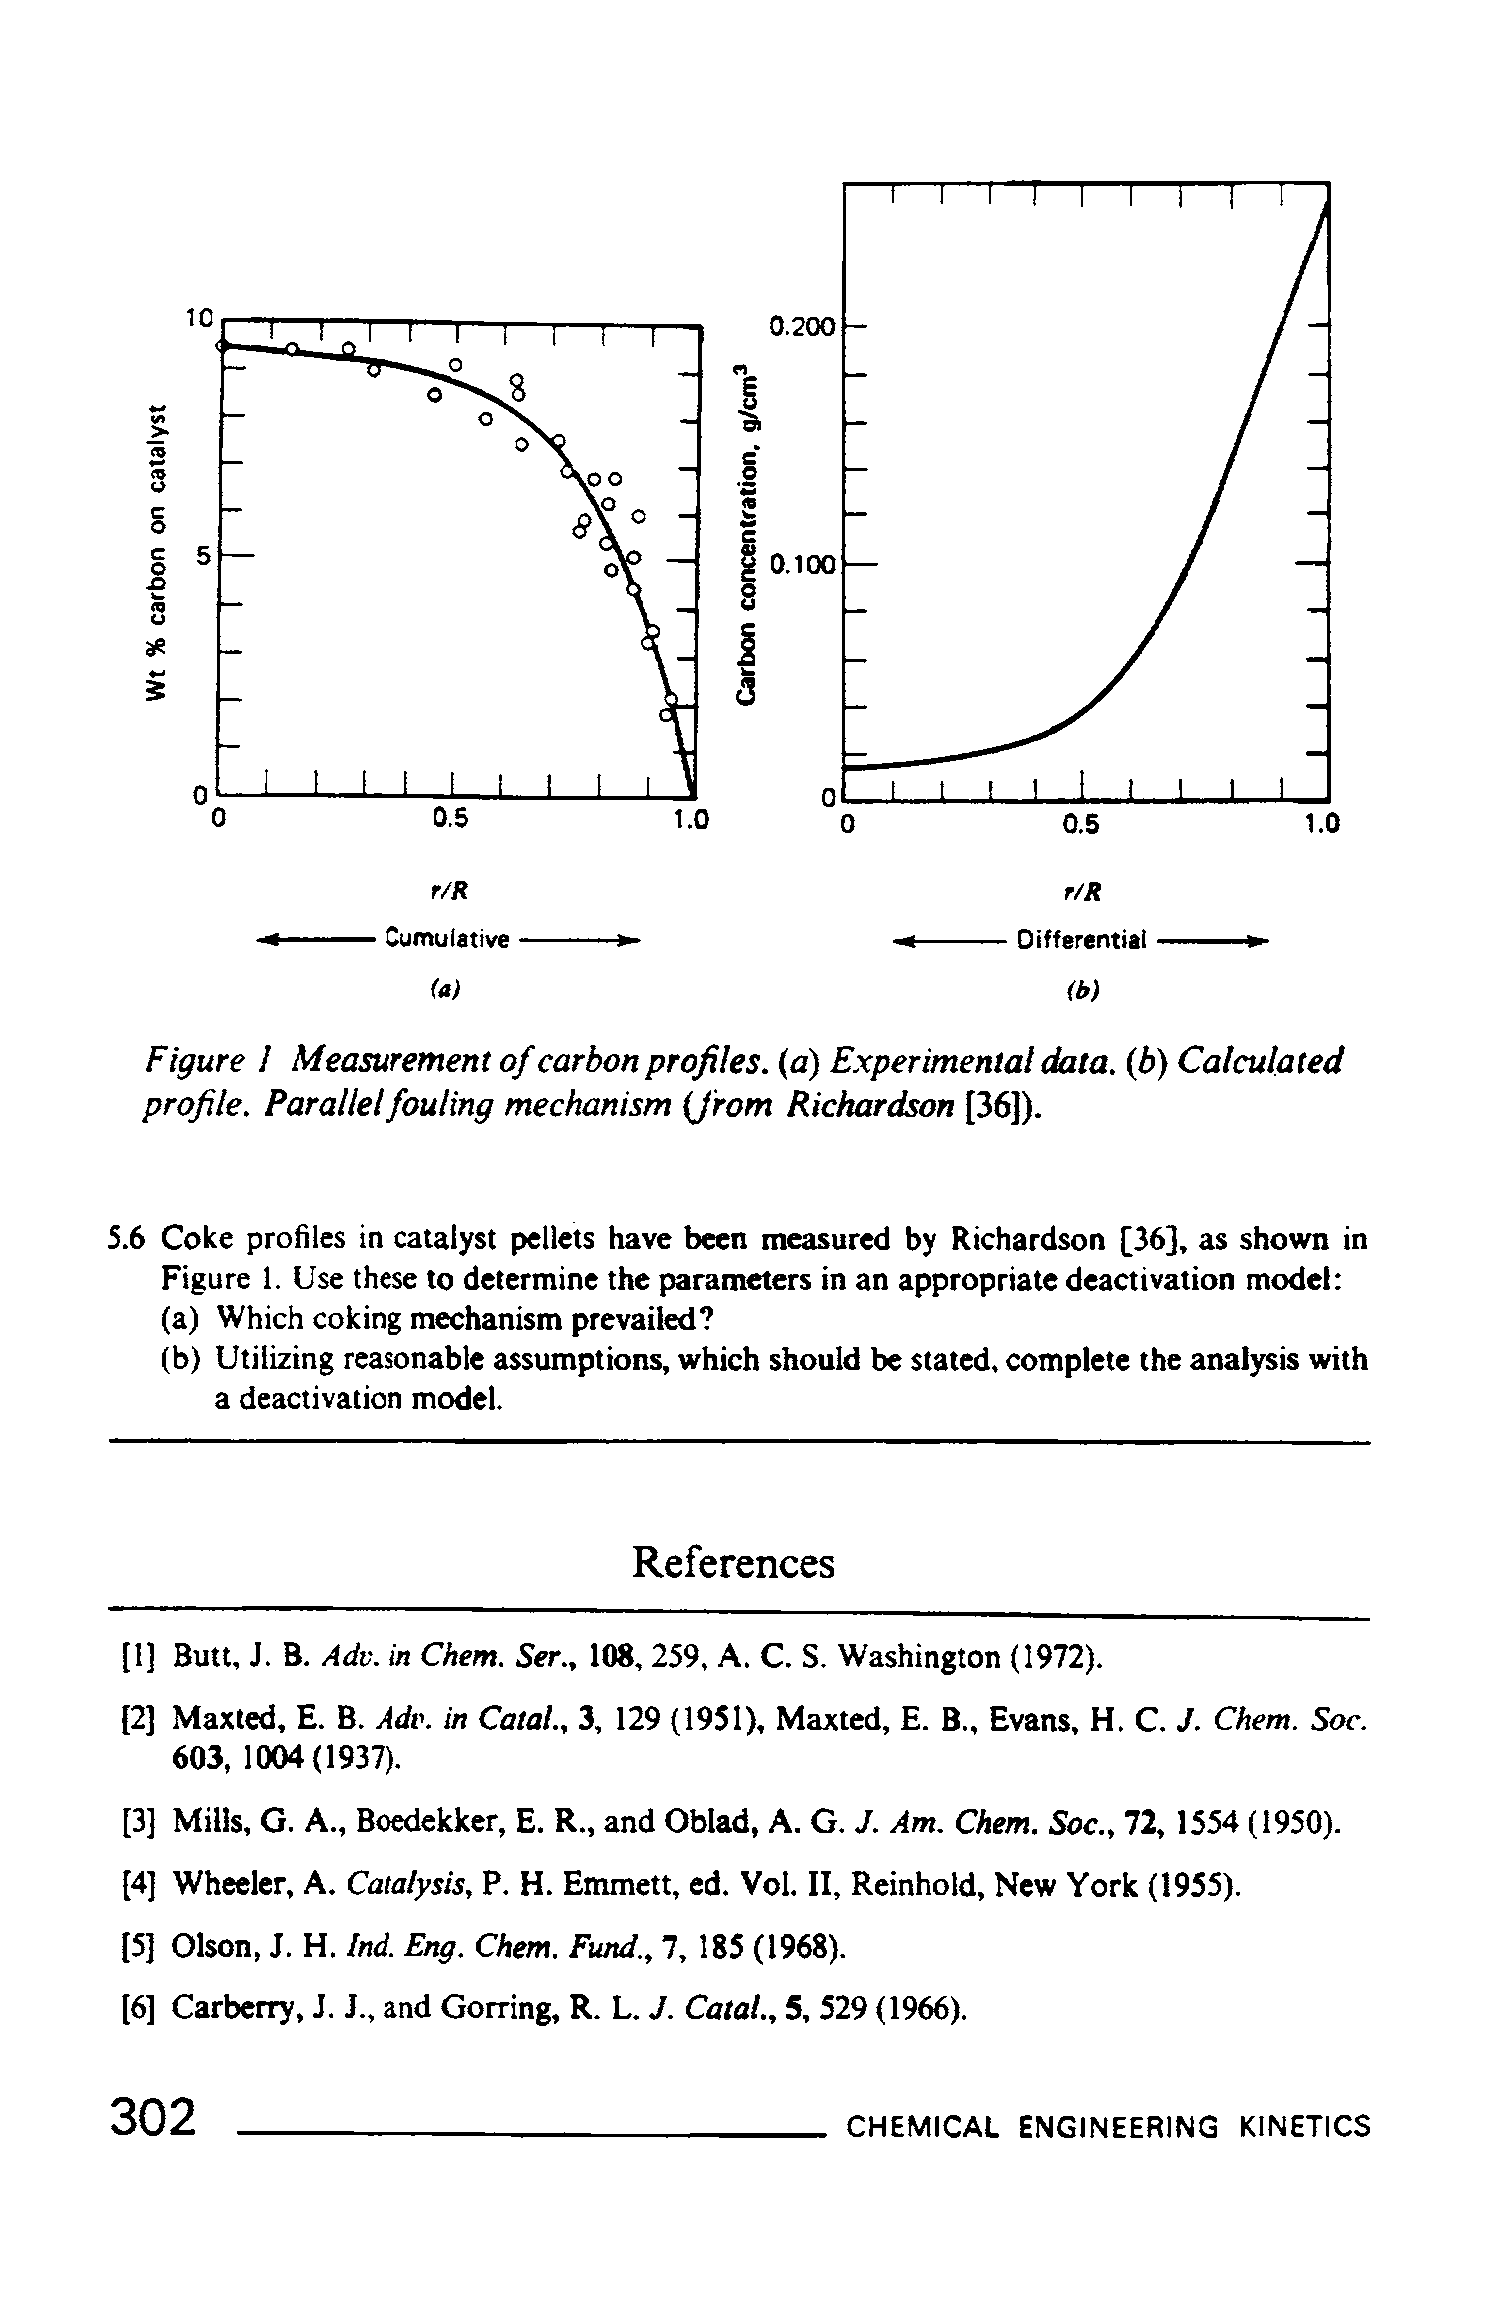 Figure I Measurement of carbon profiles, (a) Experimental data. (6) Calculated profile. Parallel fouling mechanism (from Richardson [36]).